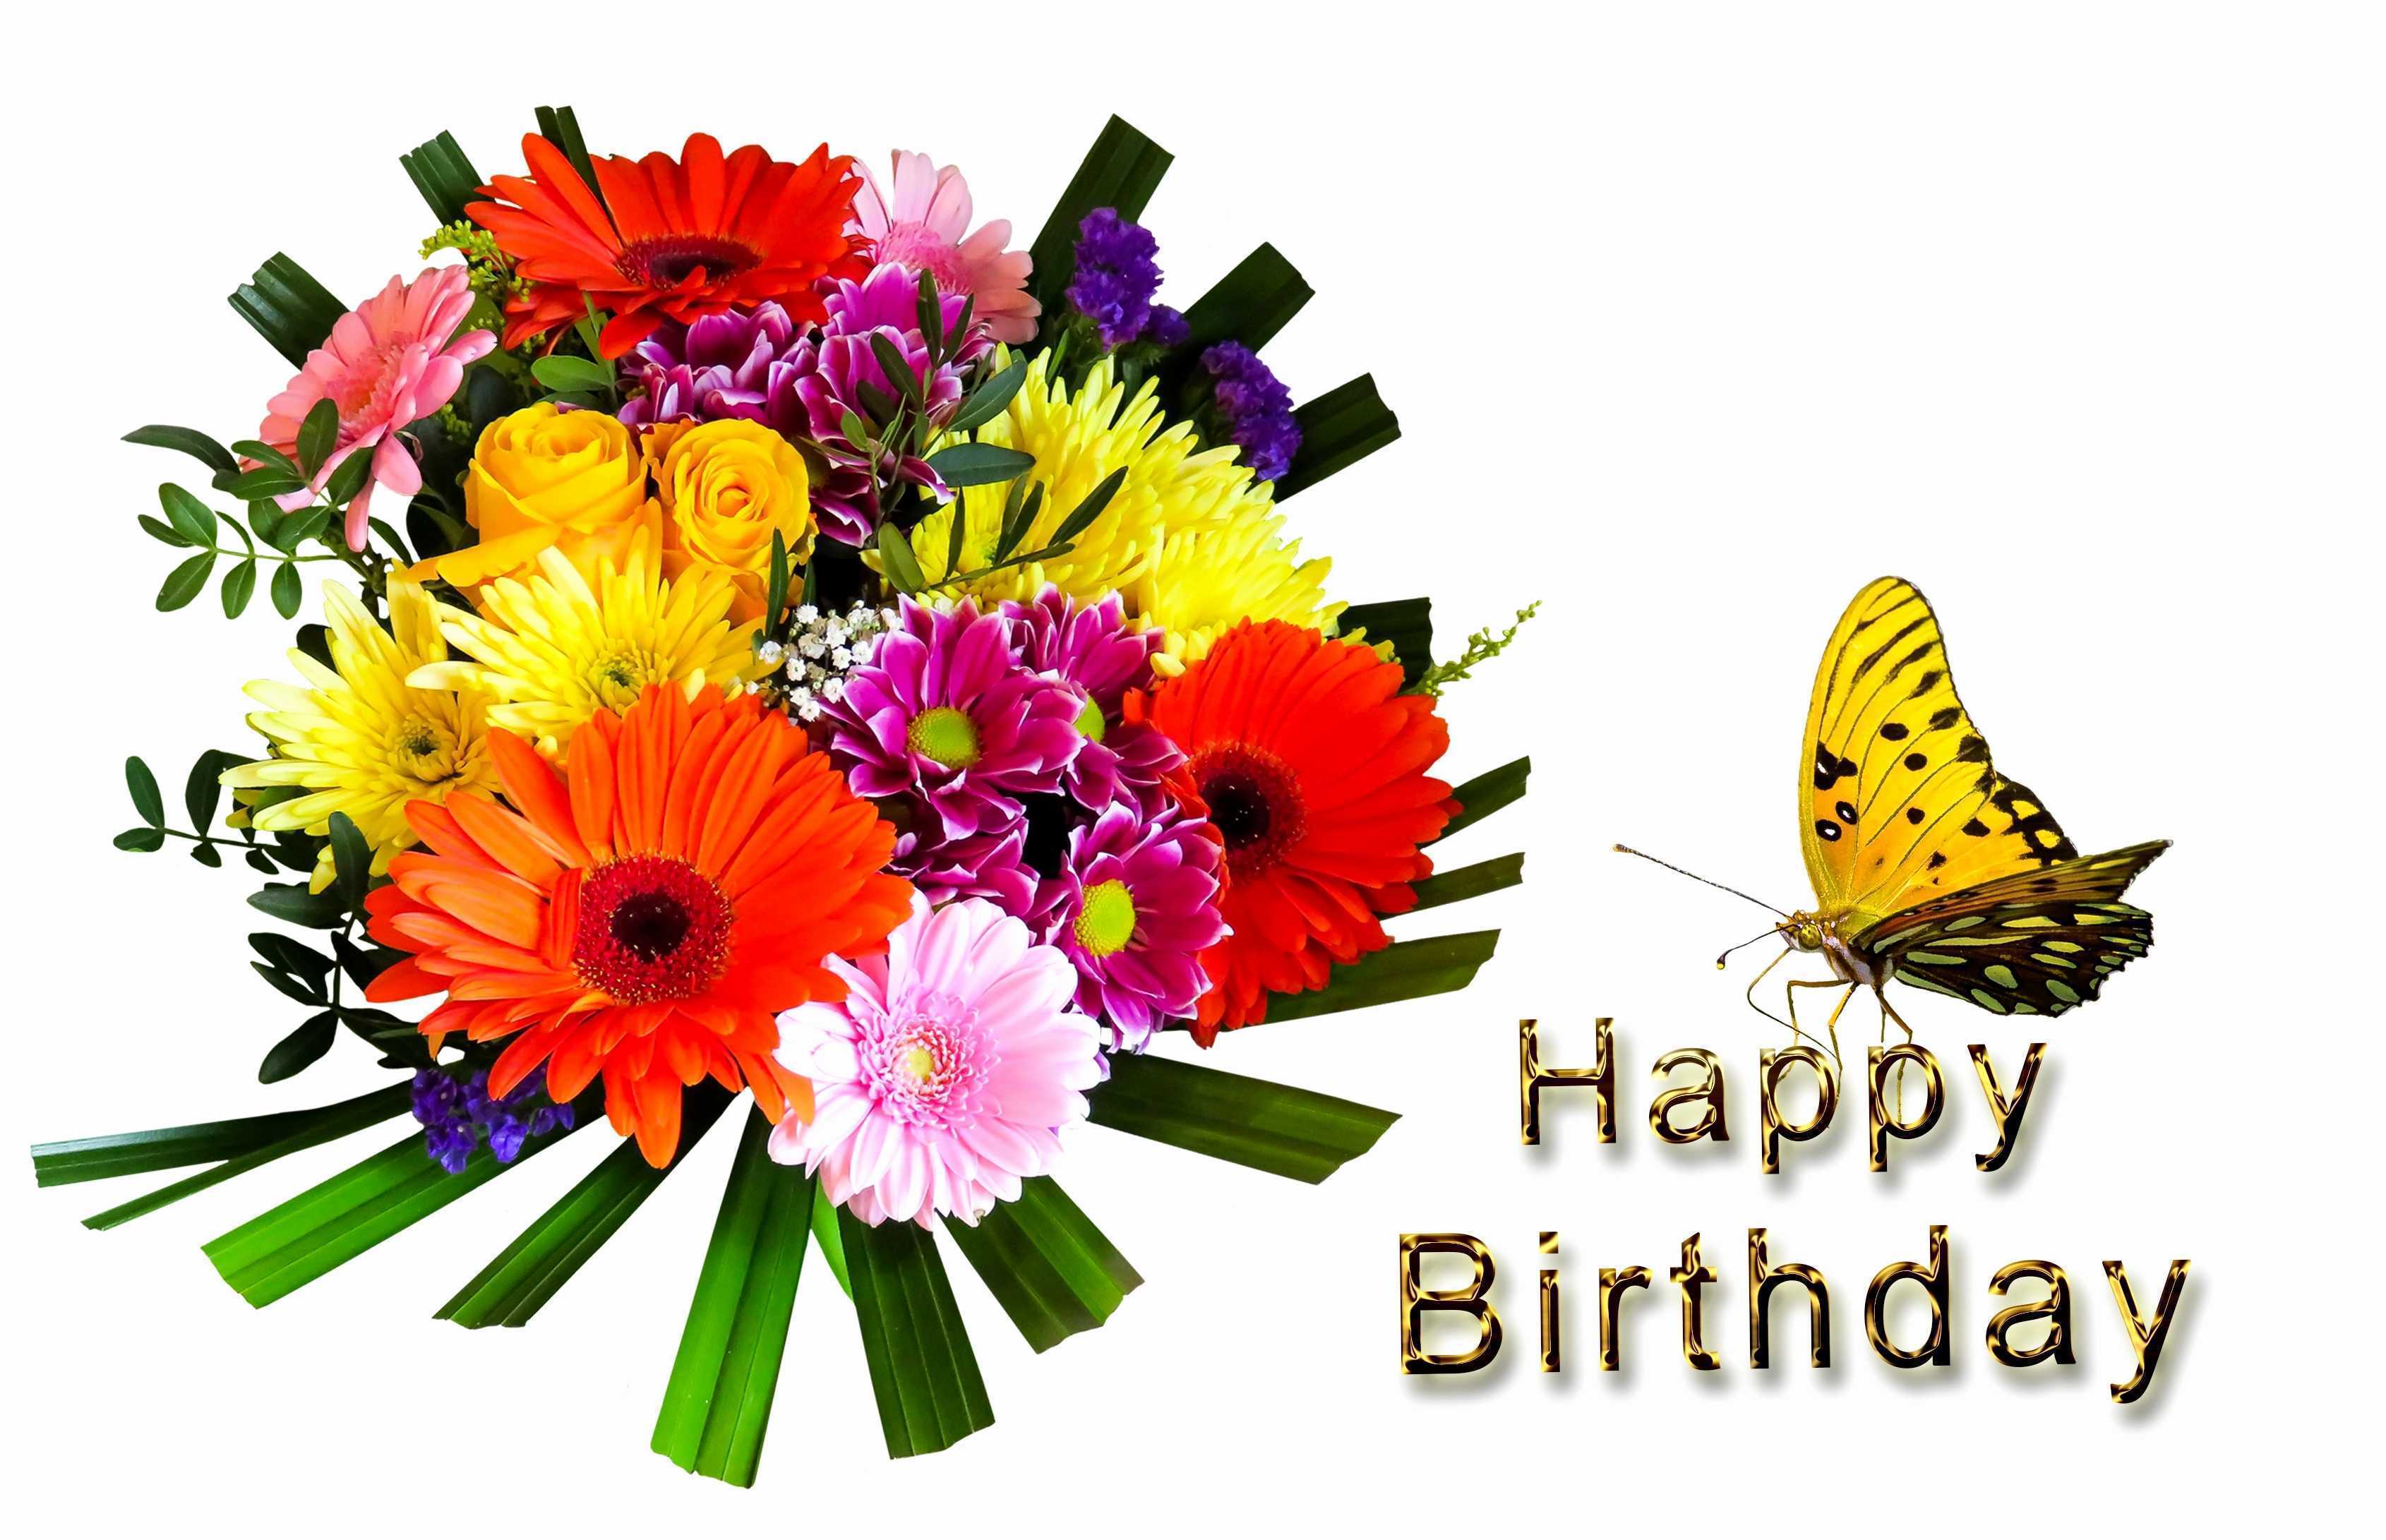 happy birthday bouquet Blooms same carnations fromyouflowers blissful carnation funerals anniversaries